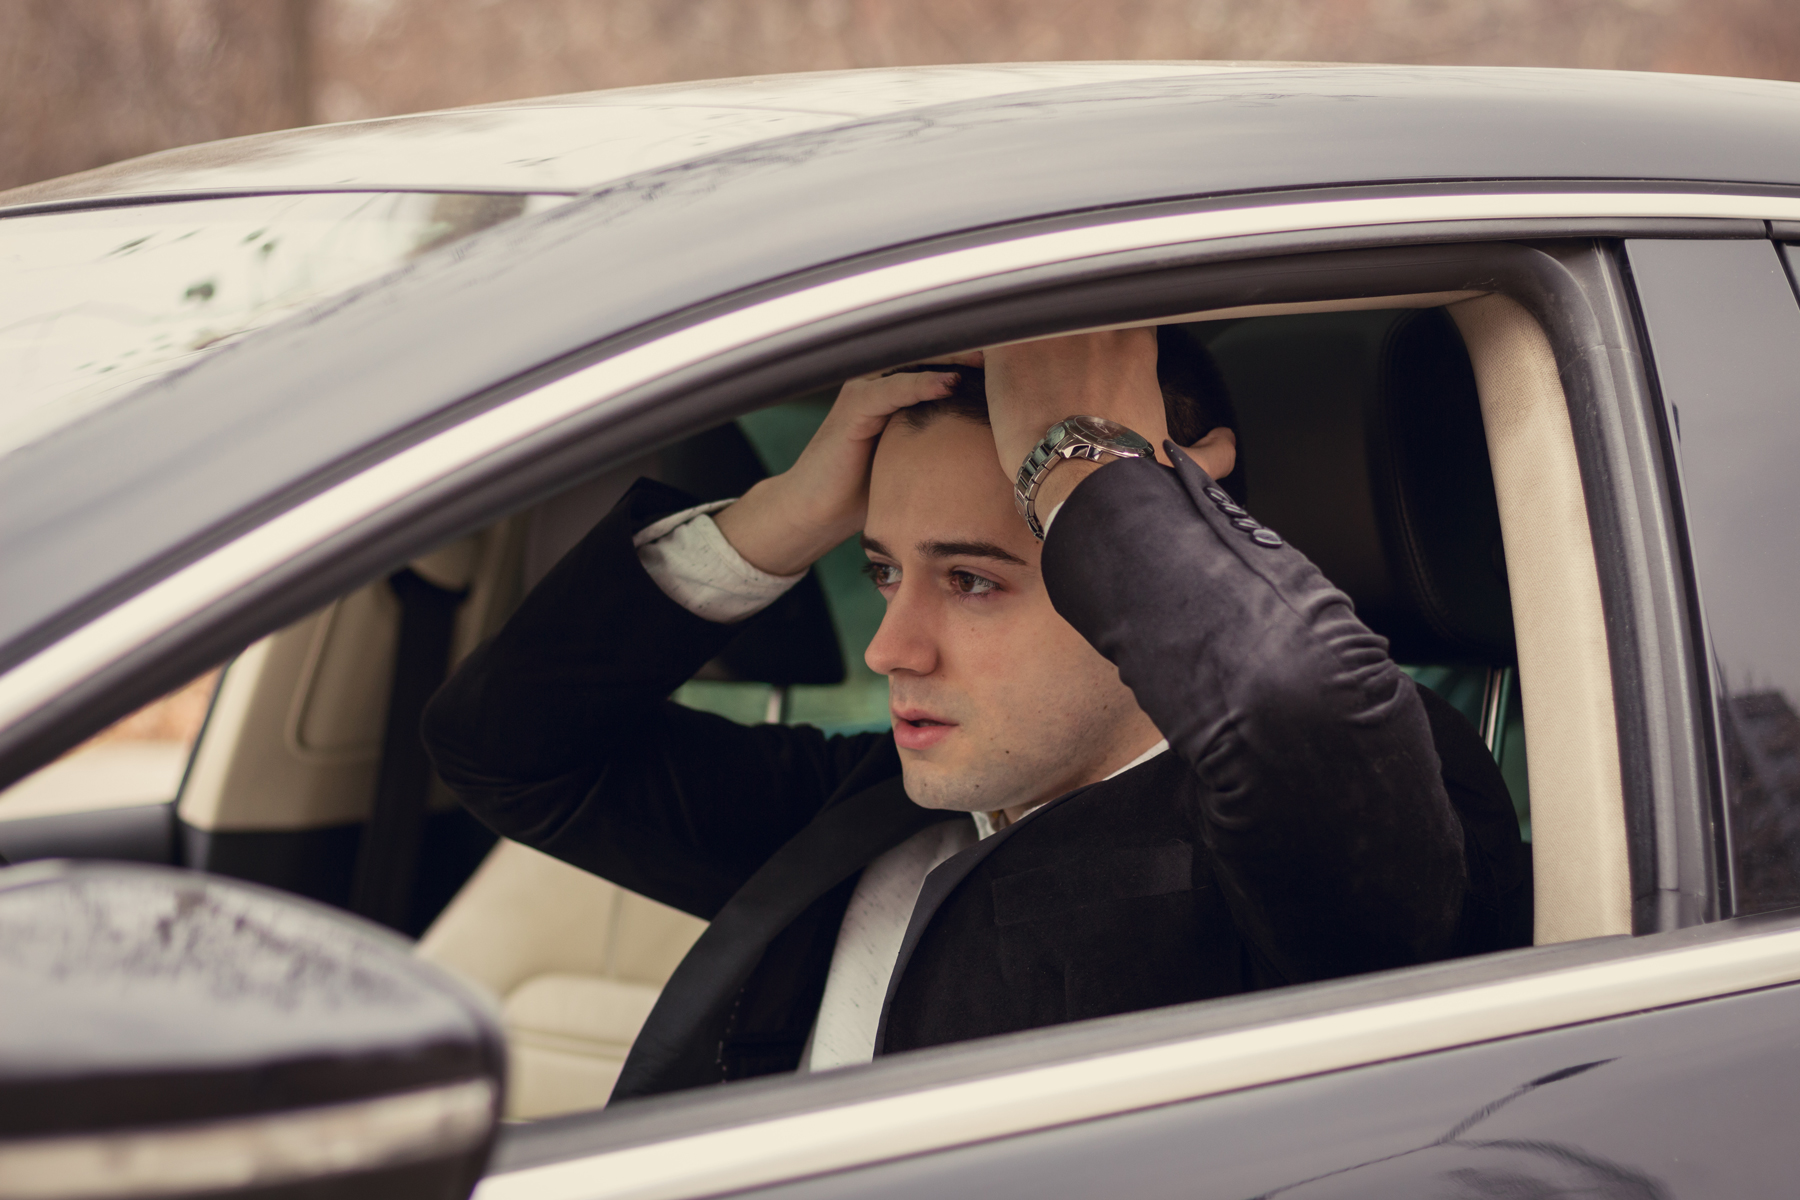 A distressed man with his hands on his head sitting in his car